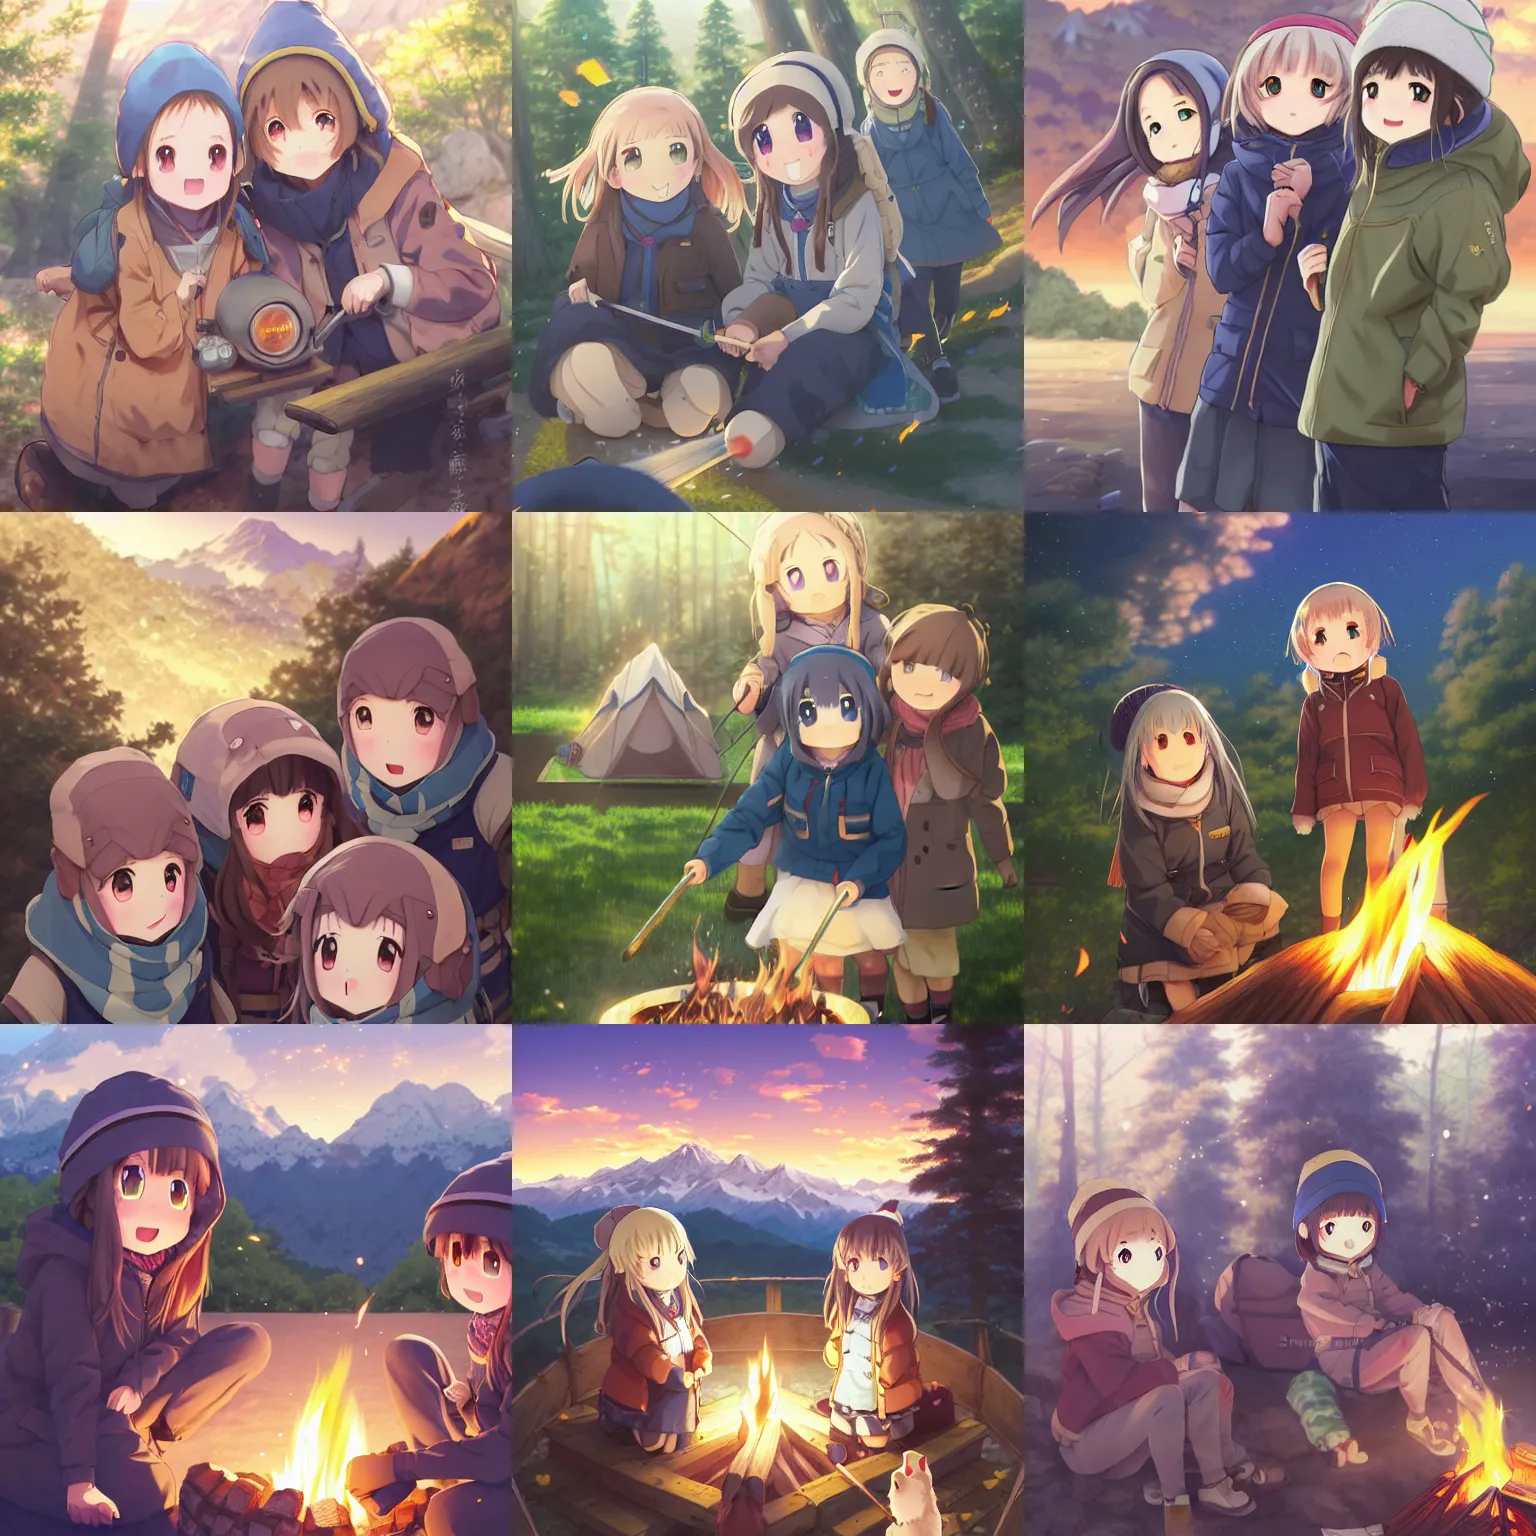 Cozy Campfires, Bitter Broth: Female Relationships in Laid-Back Camp and  Ms. Koizumi Loves Ramen Noodles - Anime Feminist